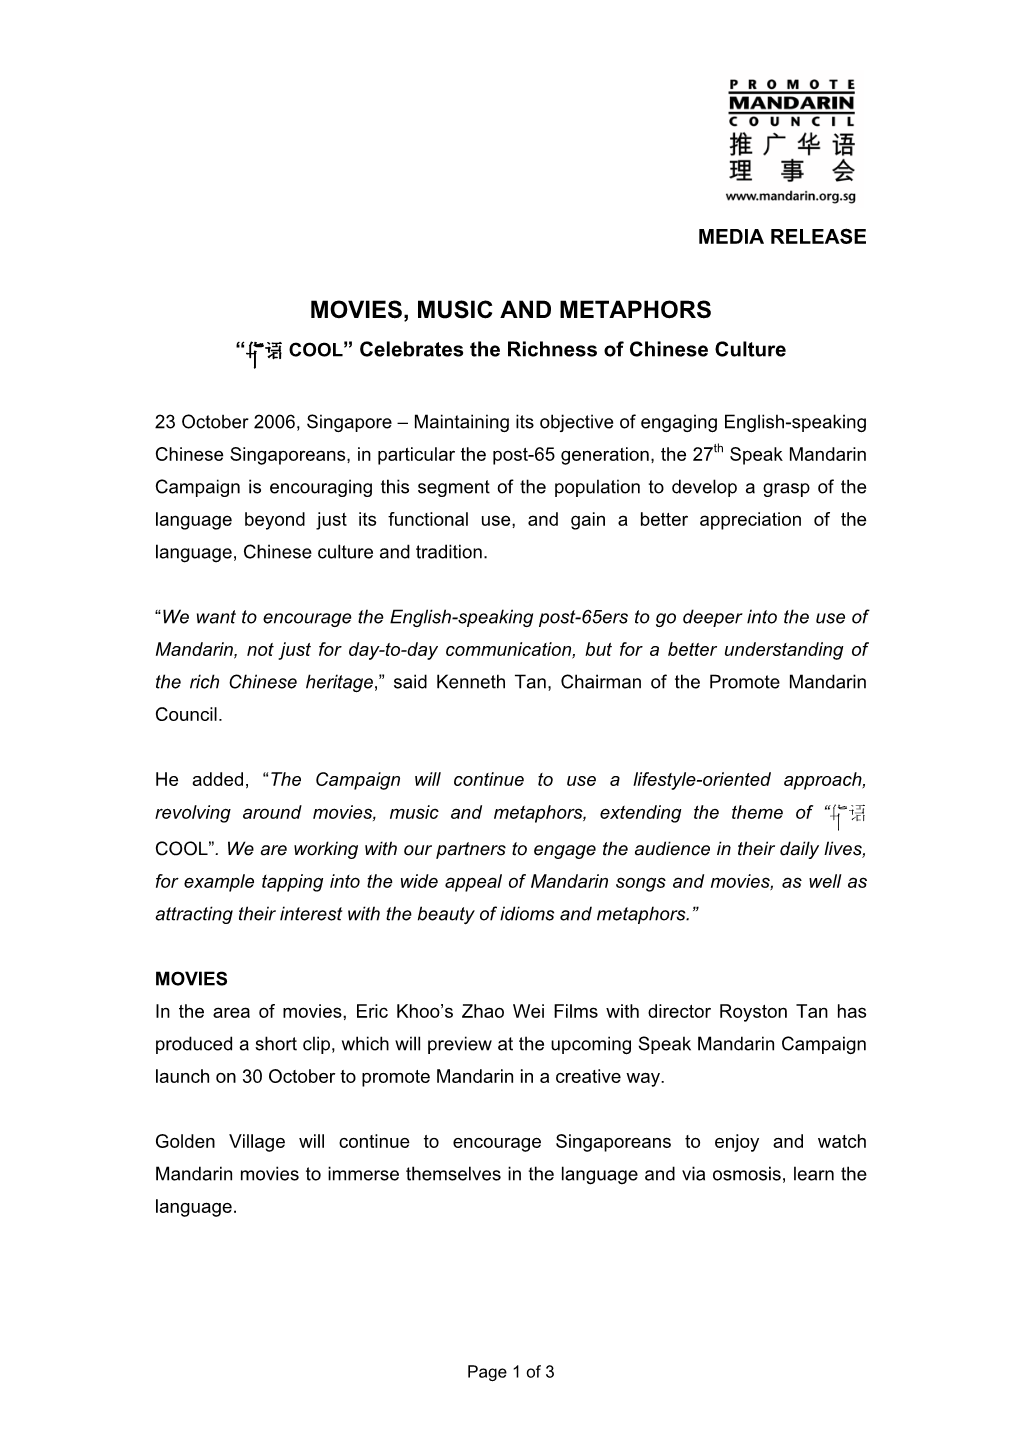 Press Release (Movies, Music and Metaphors)